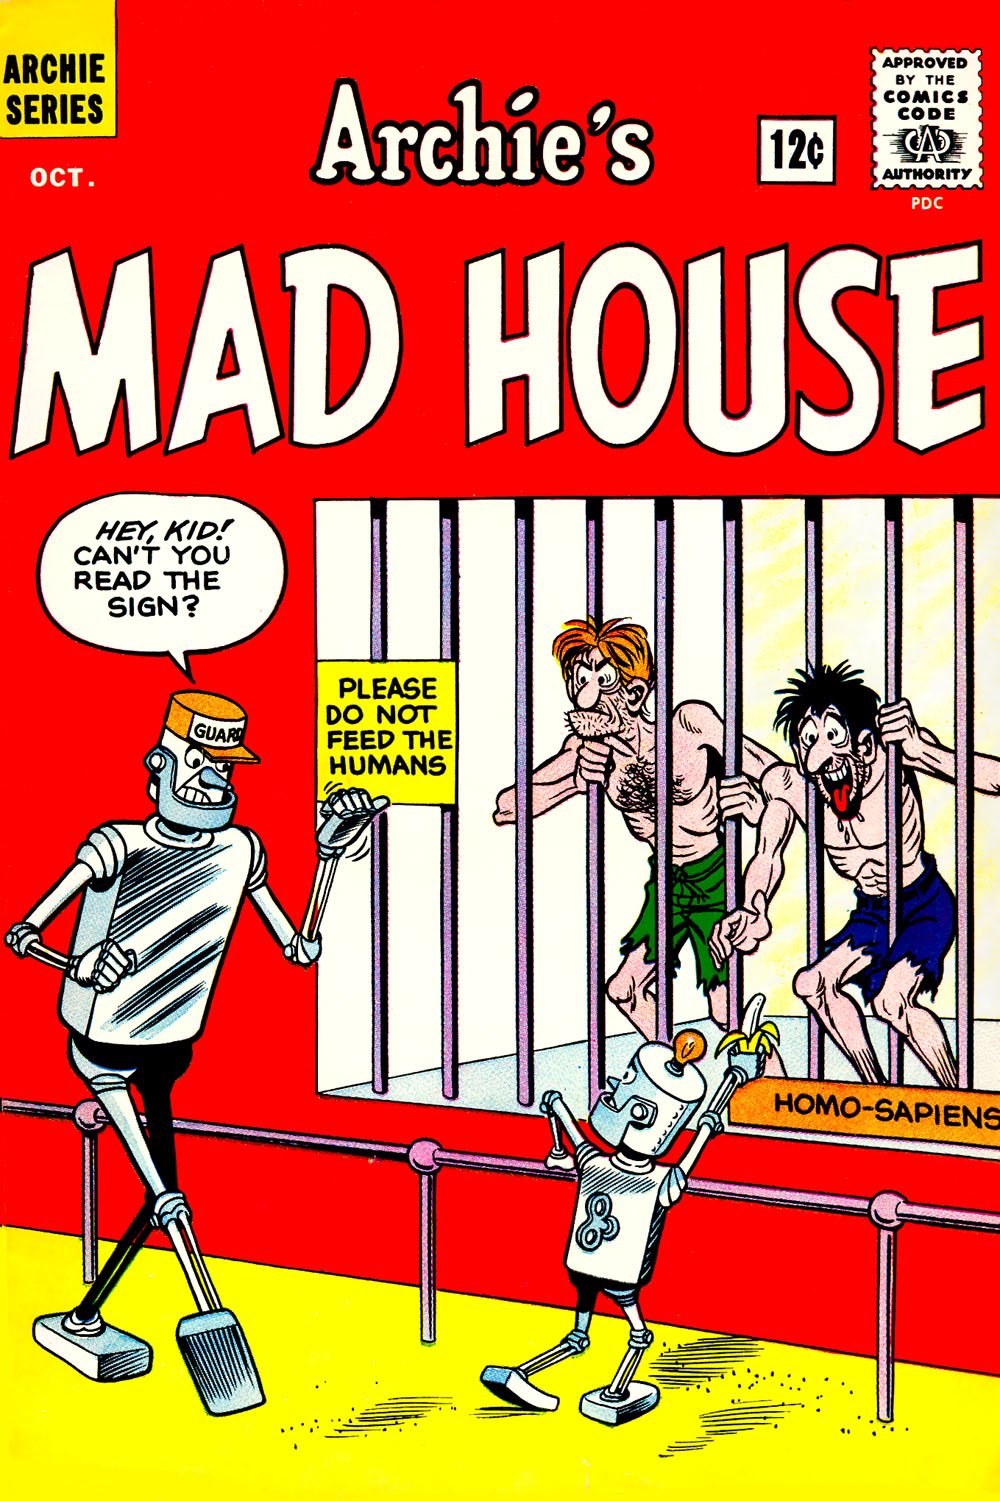 Sabrina's First Appearance Archie's Madhouse #22